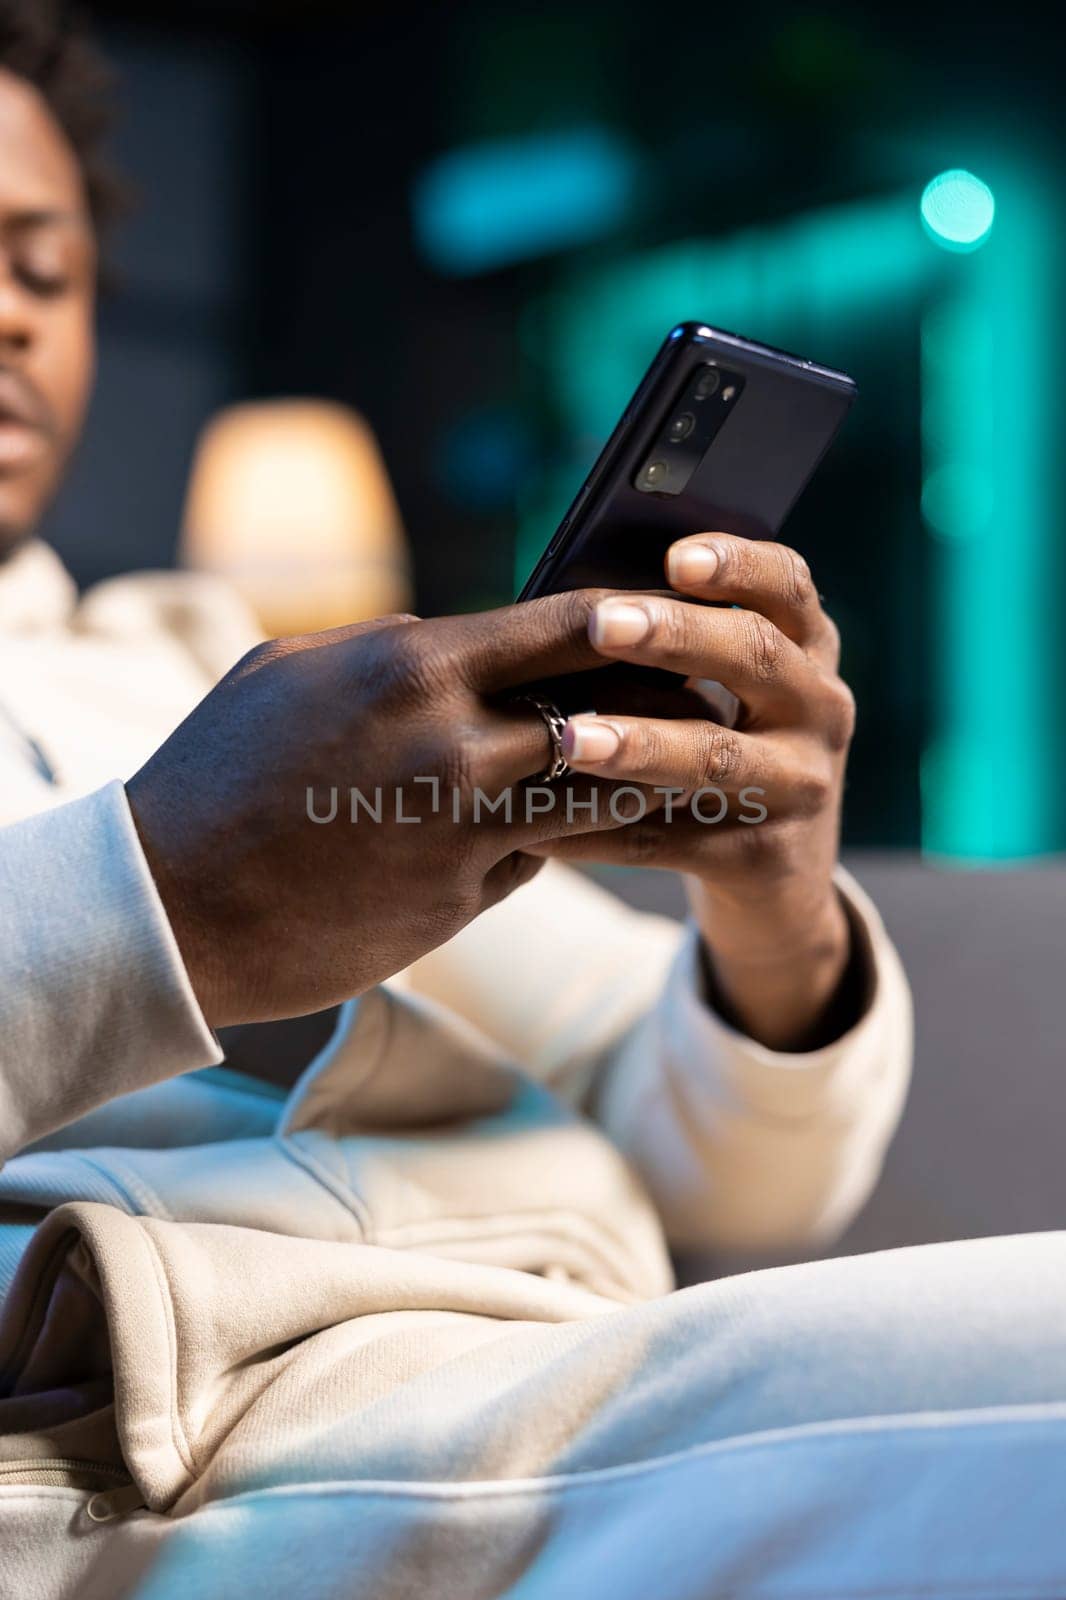 Focus on smartphone used by man in blurry background to compose messages, chatting with online friends. Close up shot of phone used by person to scroll on social media feed while at home